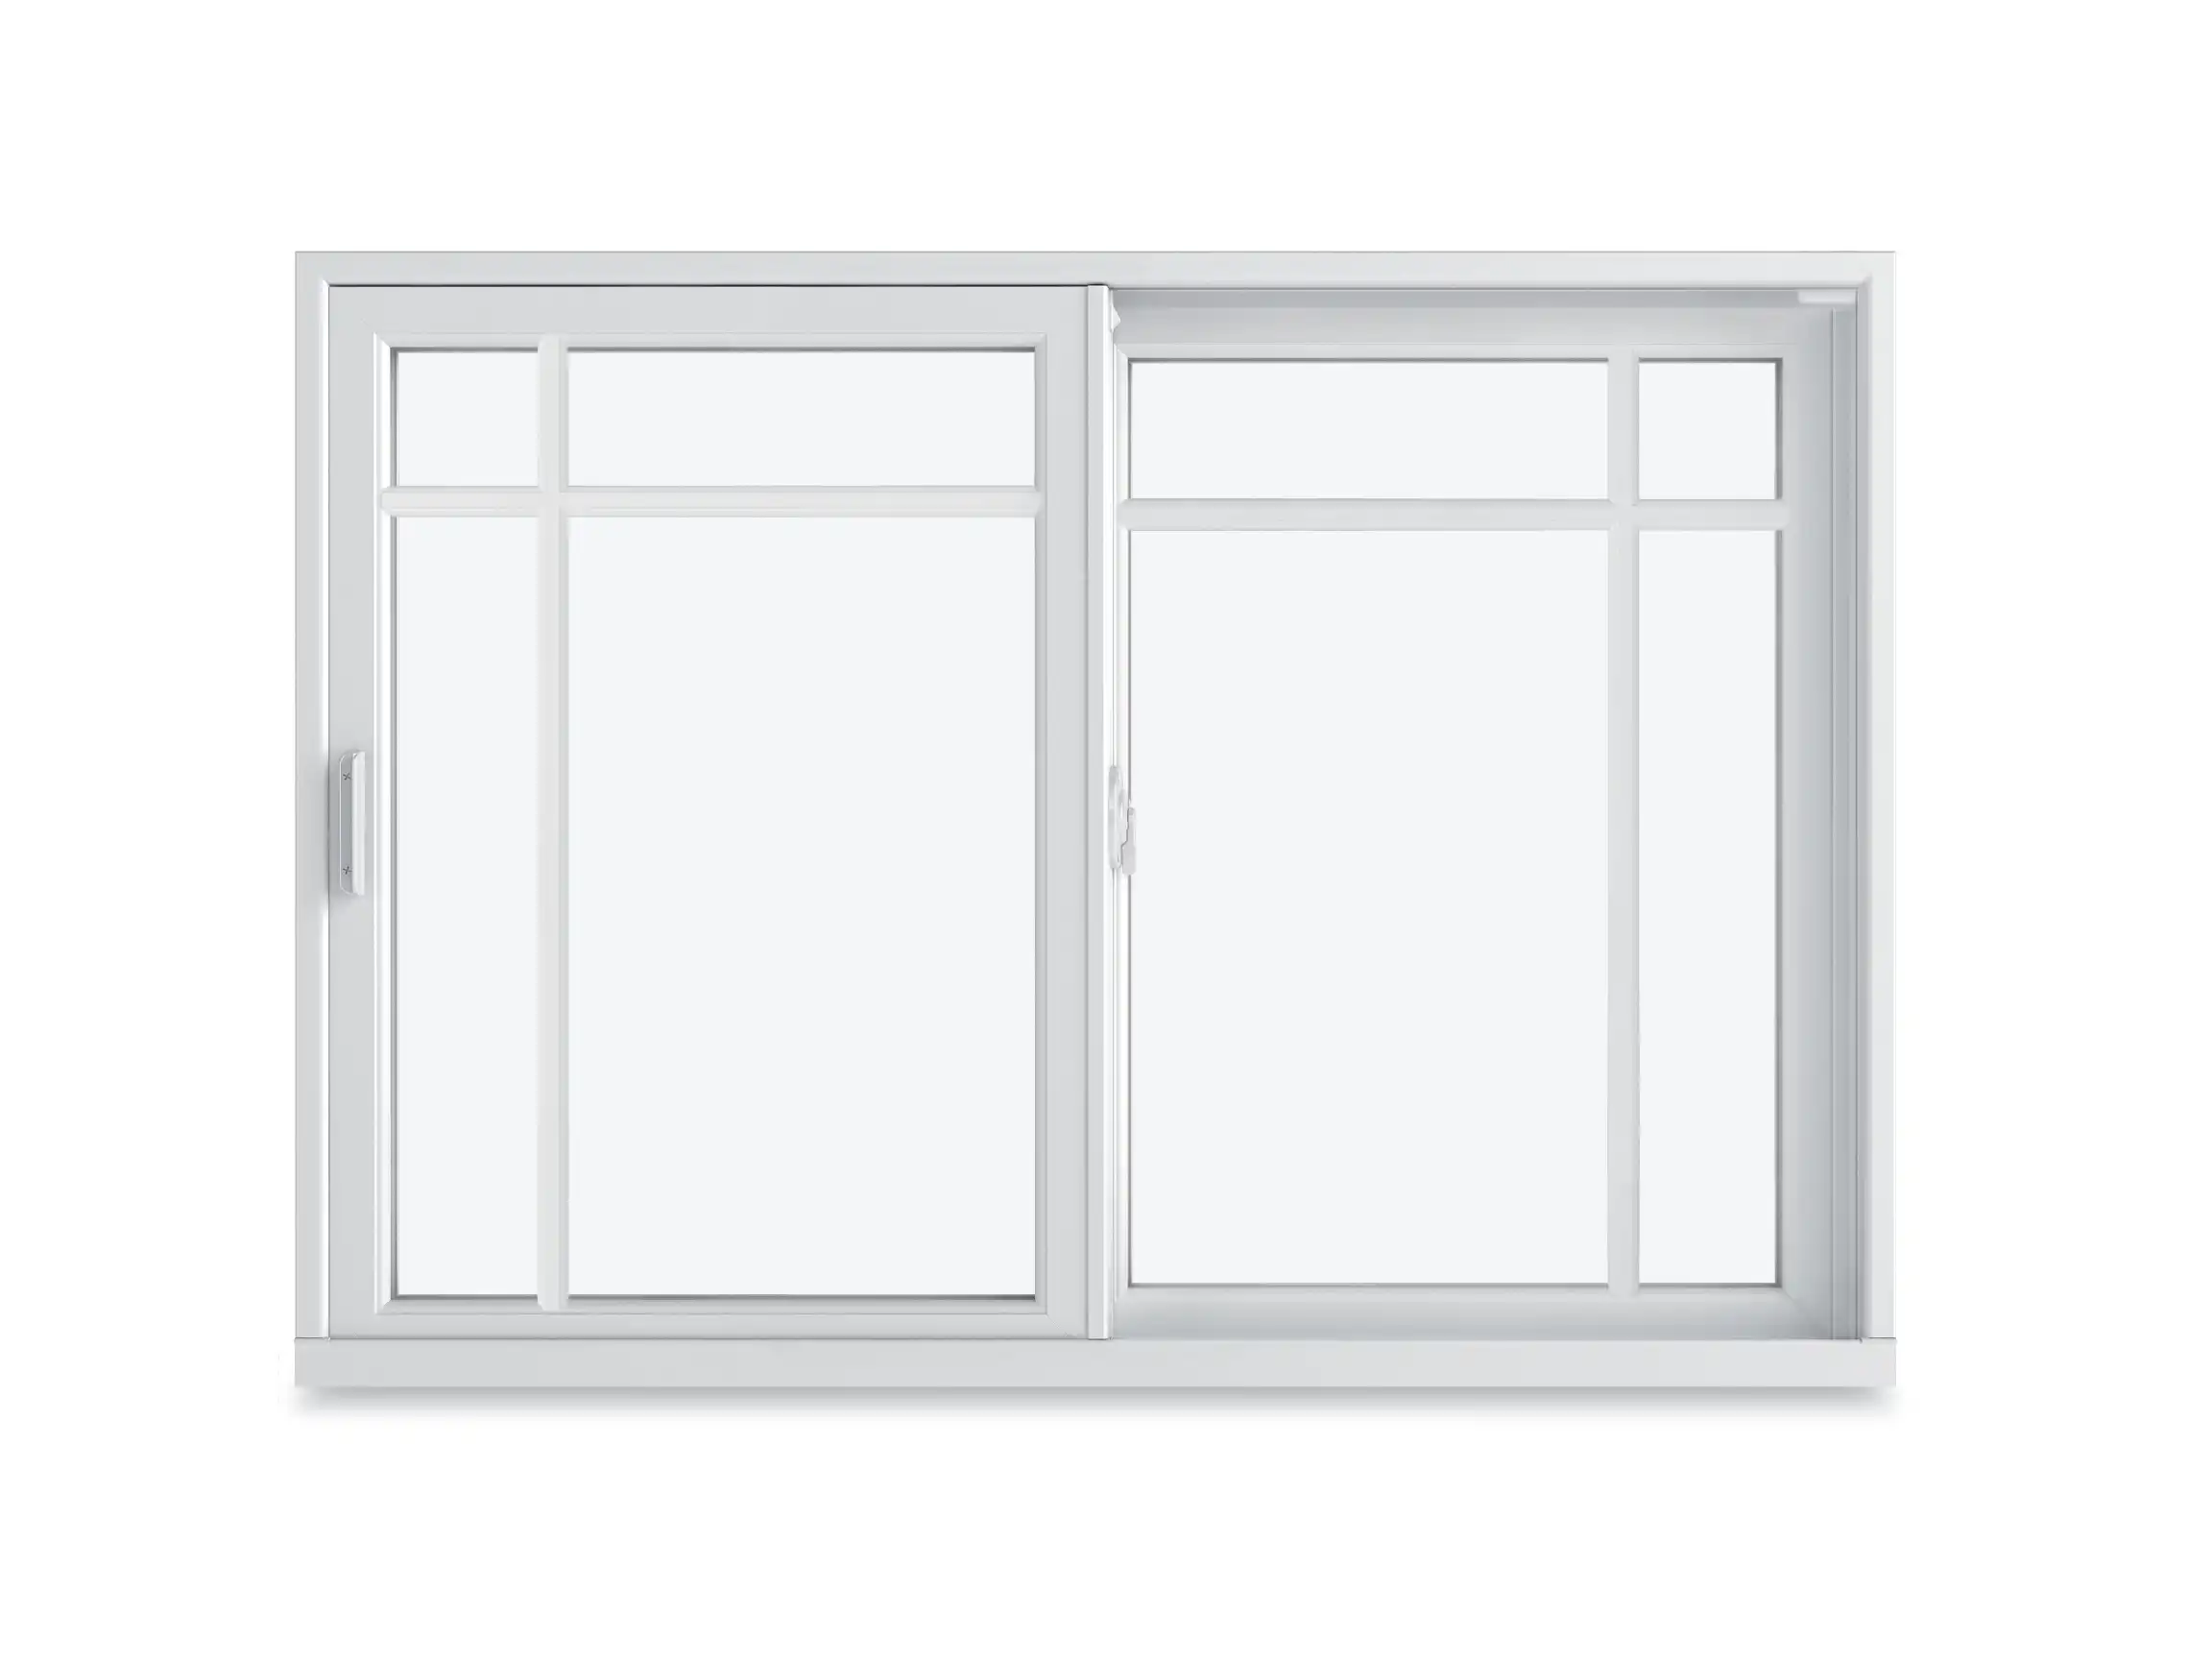 Image of a white Marvin Replacement Slider window with a Prairie Four Lite divided lite style.